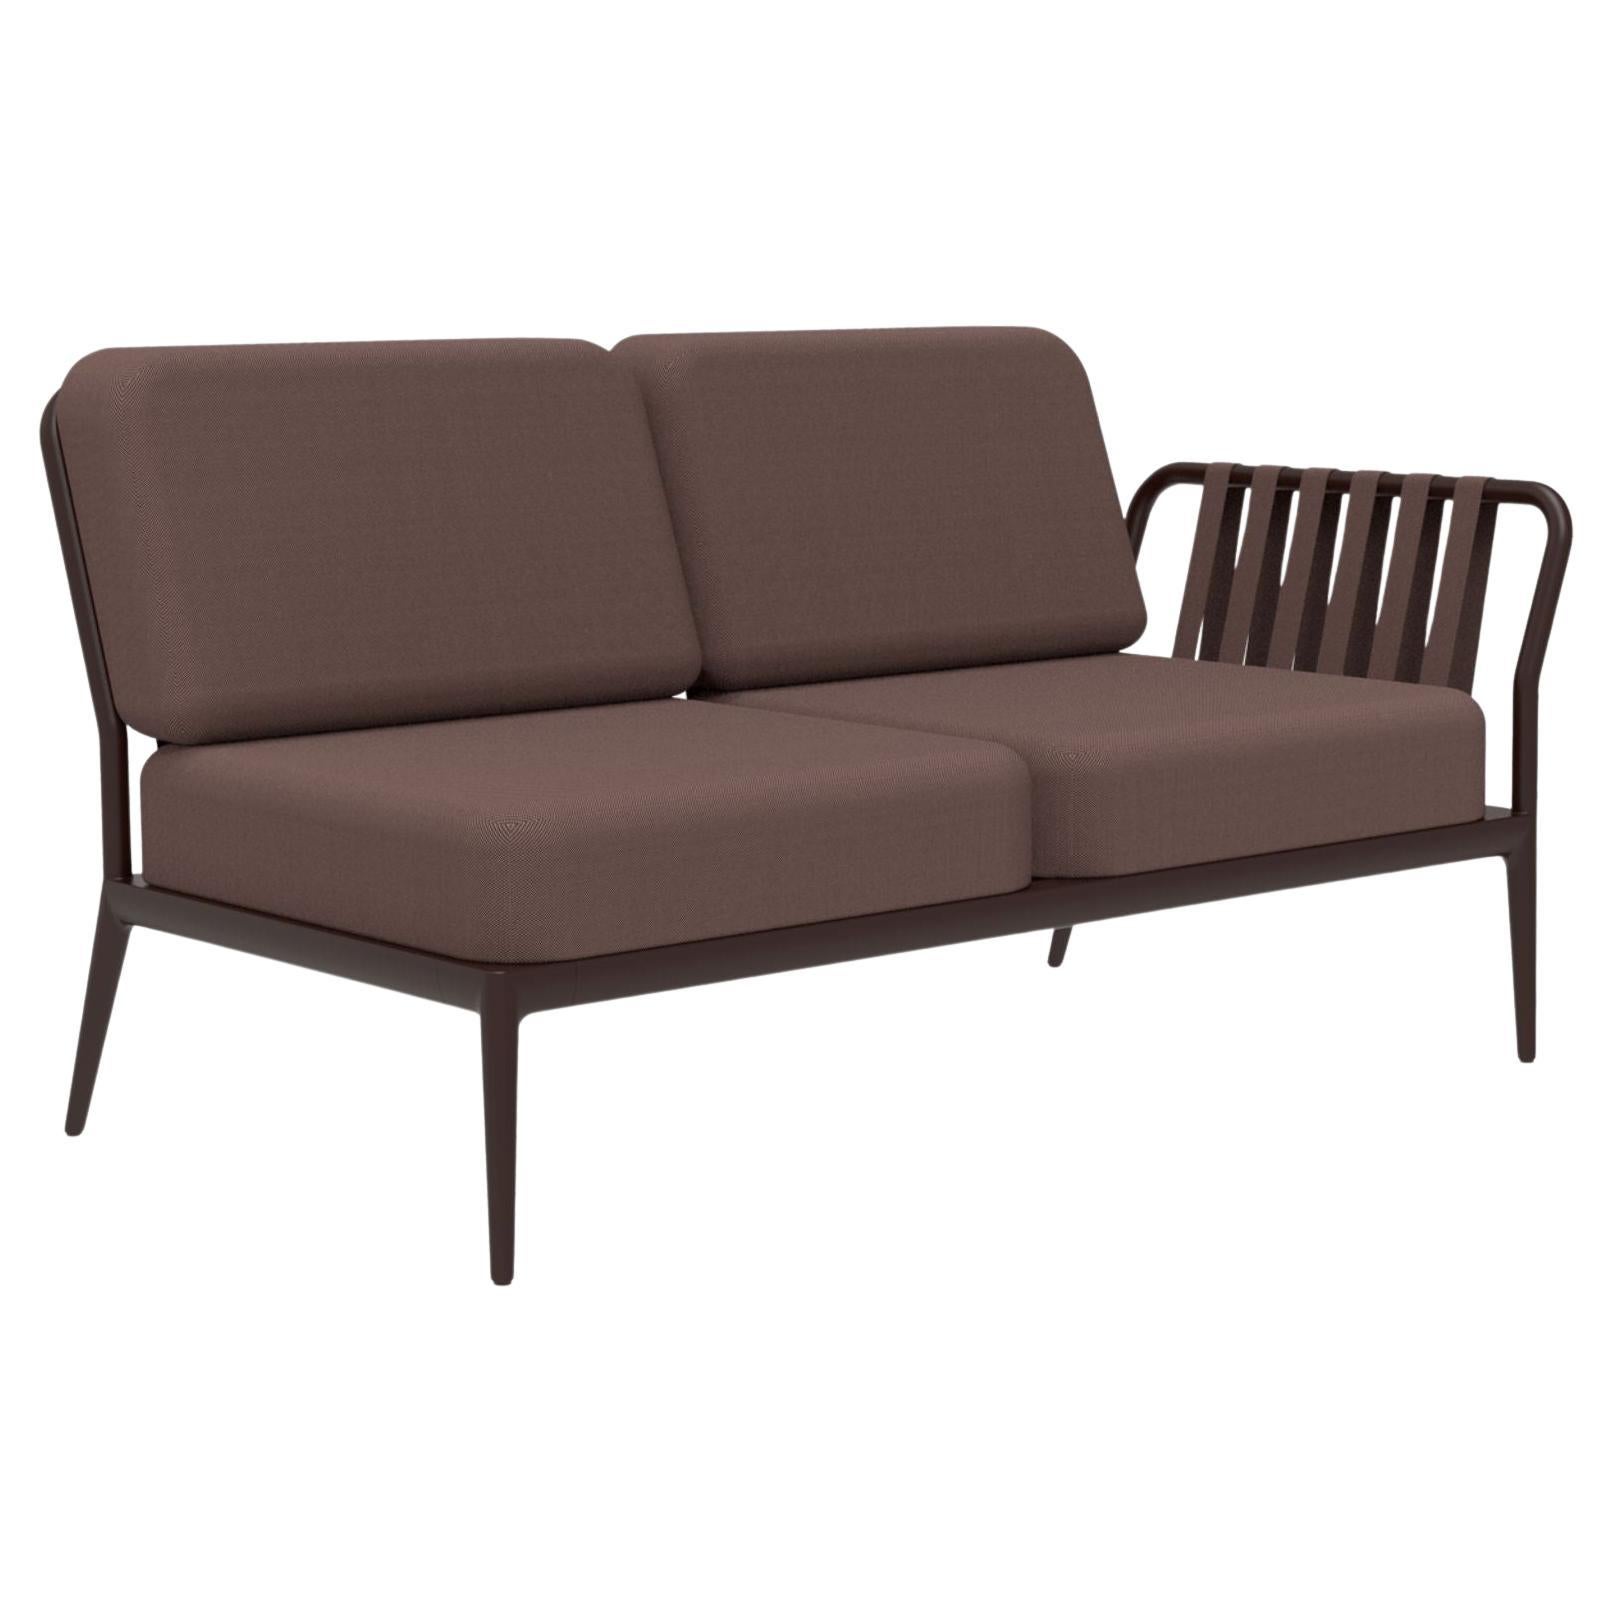 Ribbons Chocolate Double Left Modular Sofa by Mowee